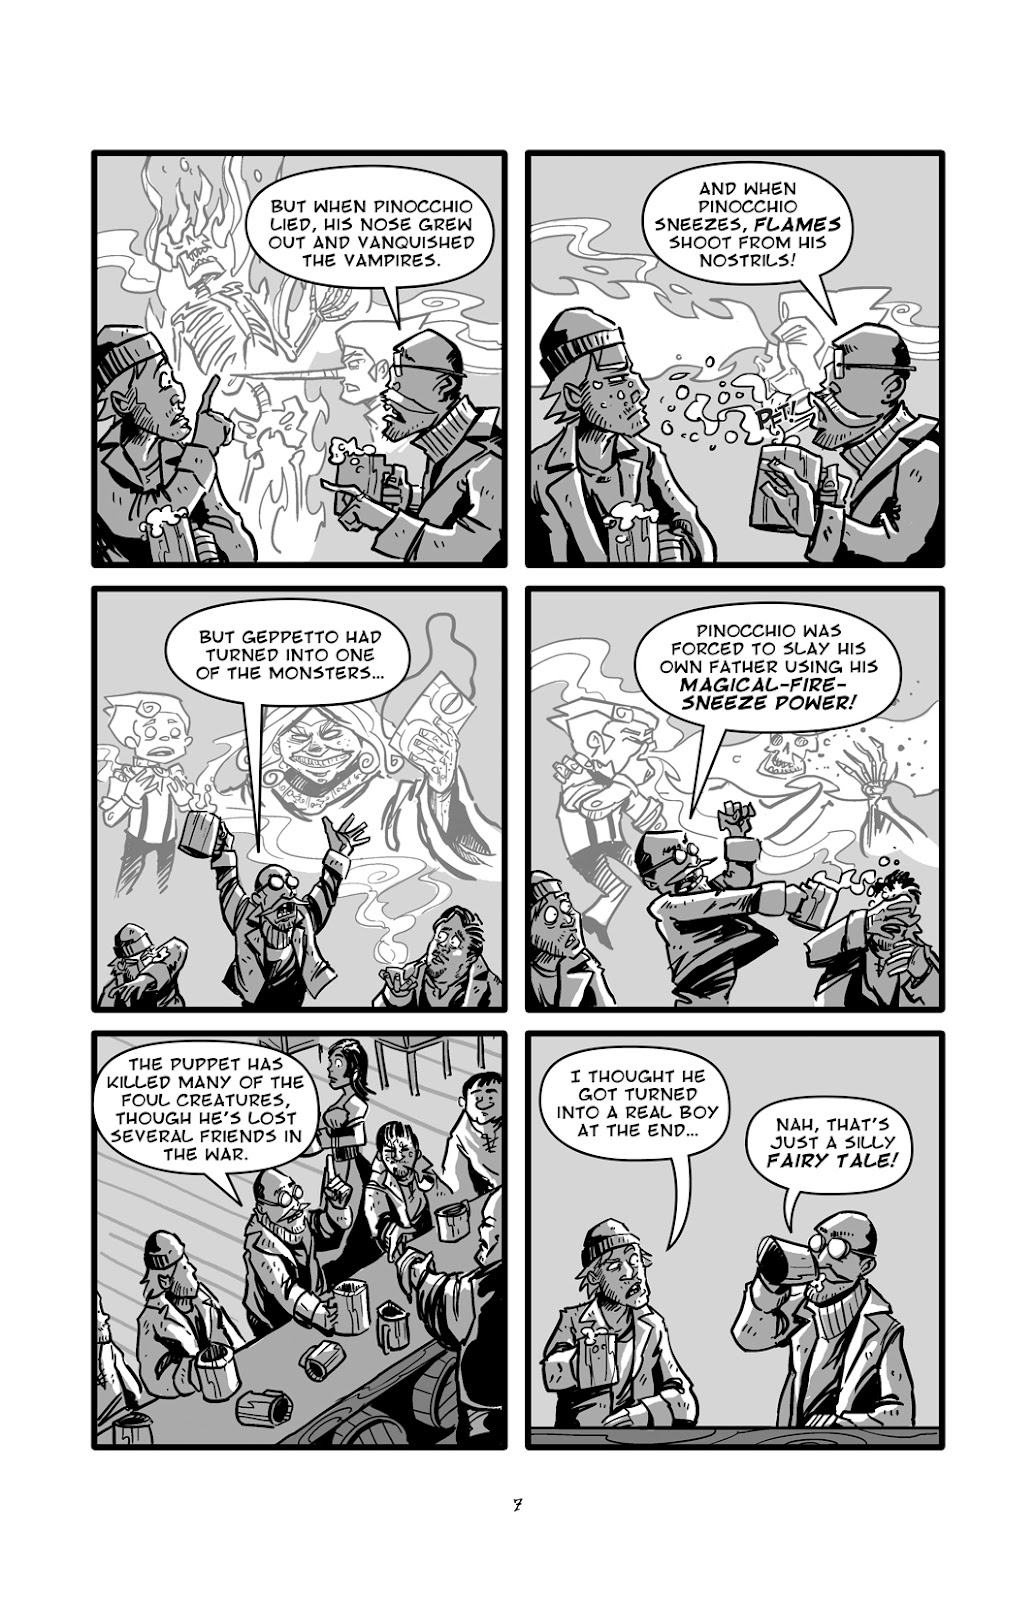 Pinocchio: Vampire Slayer - Of Wood and Blood issue 1 - Page 8